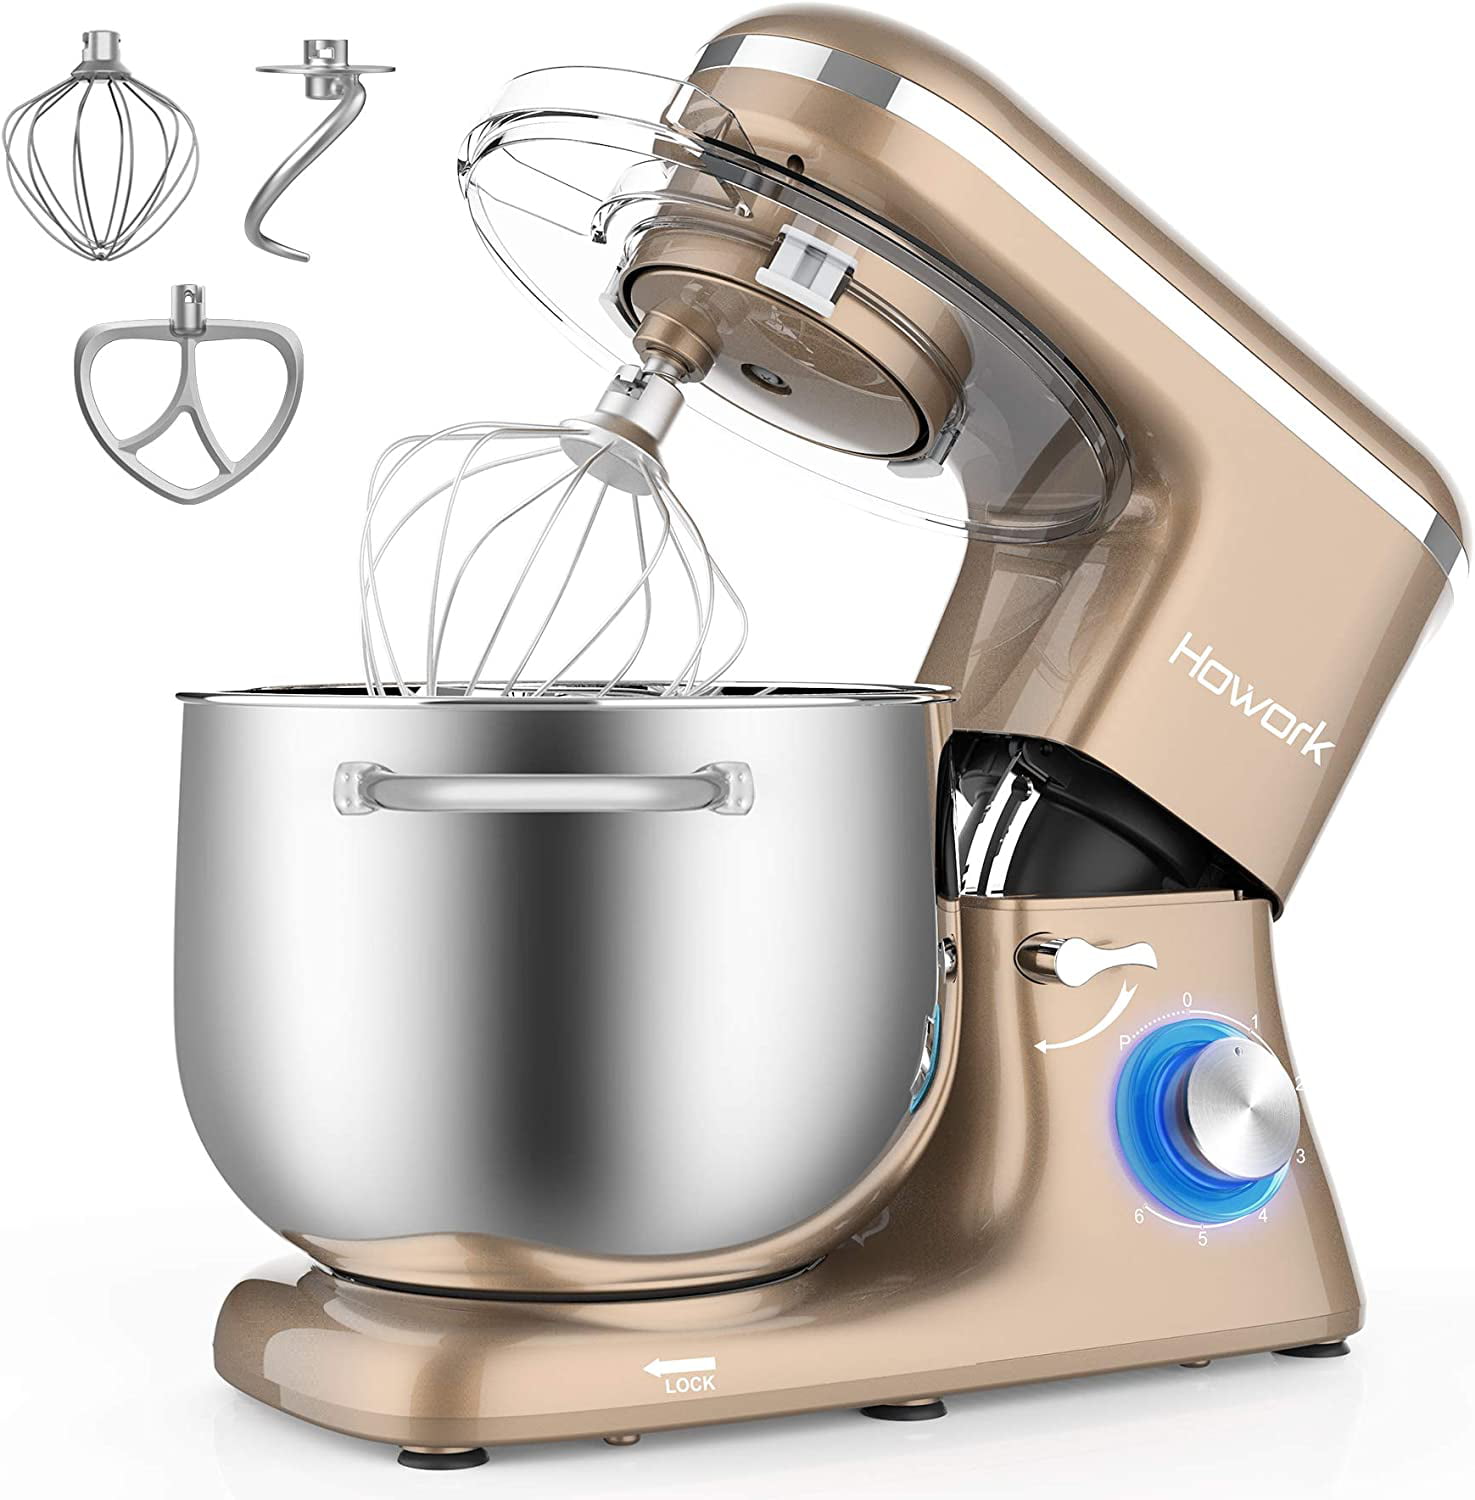 HOWORK Stand Mixer, 8.45 QT Bowl 660W Food Mixer, Multi Functional Kitchen  Electric Mixer With Dough Hook, Whisk, Beater (8.45 QT, Champagne Gold) 